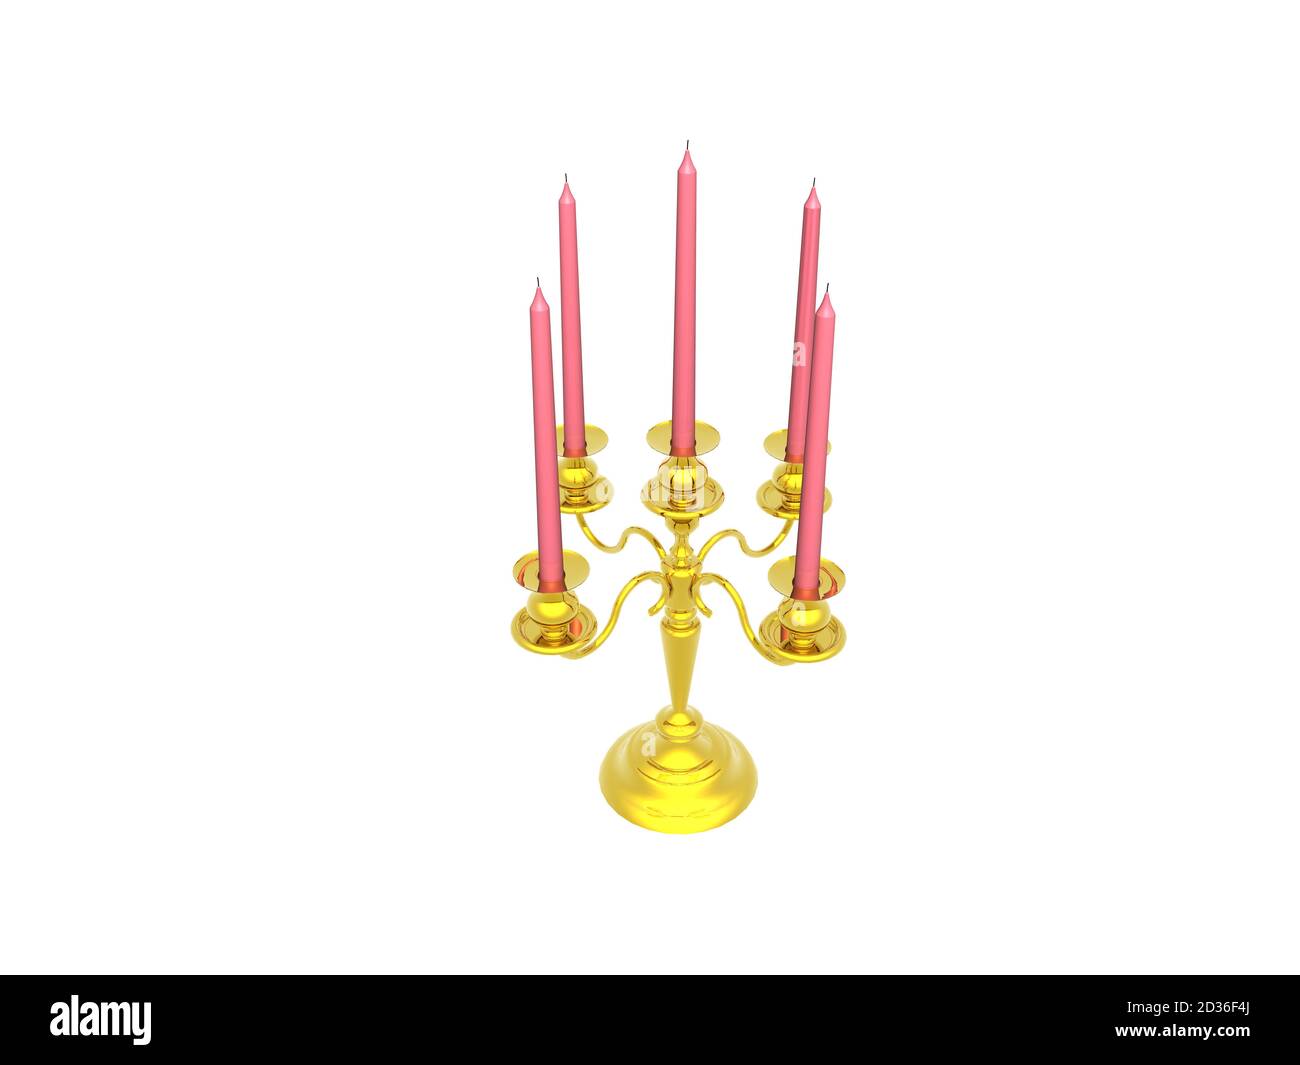 metallic candelabrum with pink candles Stock Photo